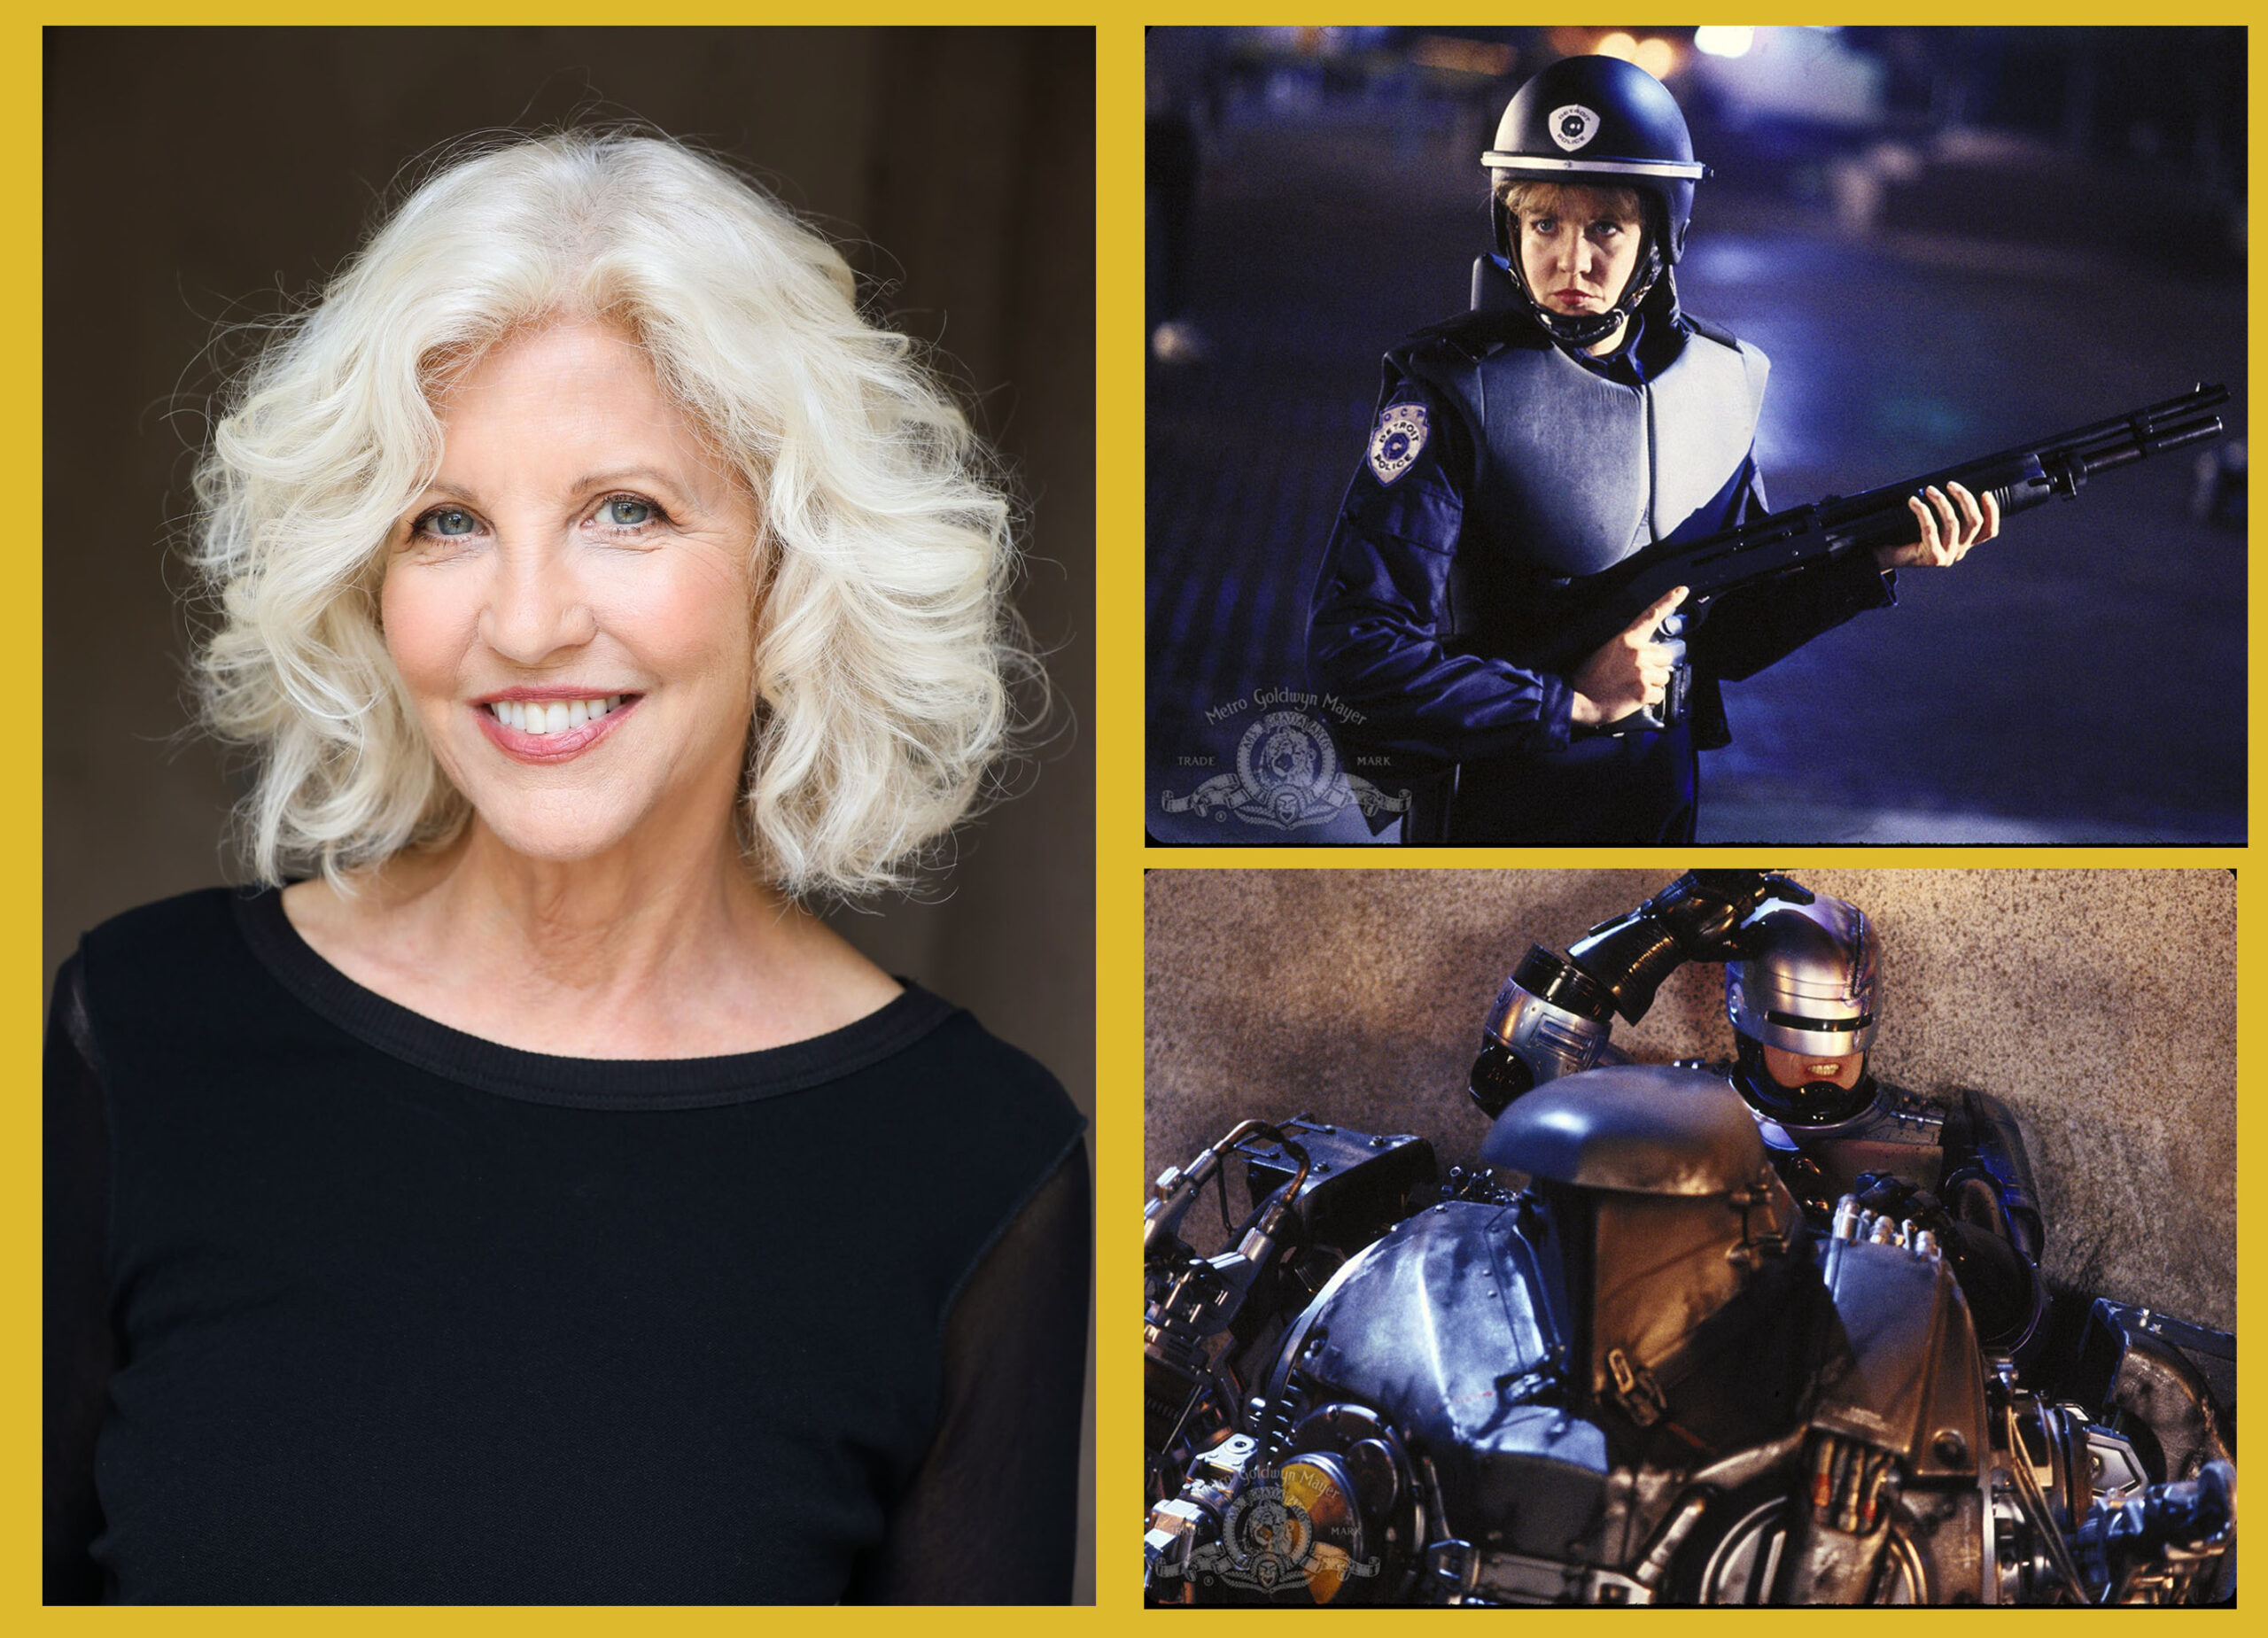 ‘RoboCop Actress’ Nancy Allen is planning to release a book about her memoirs